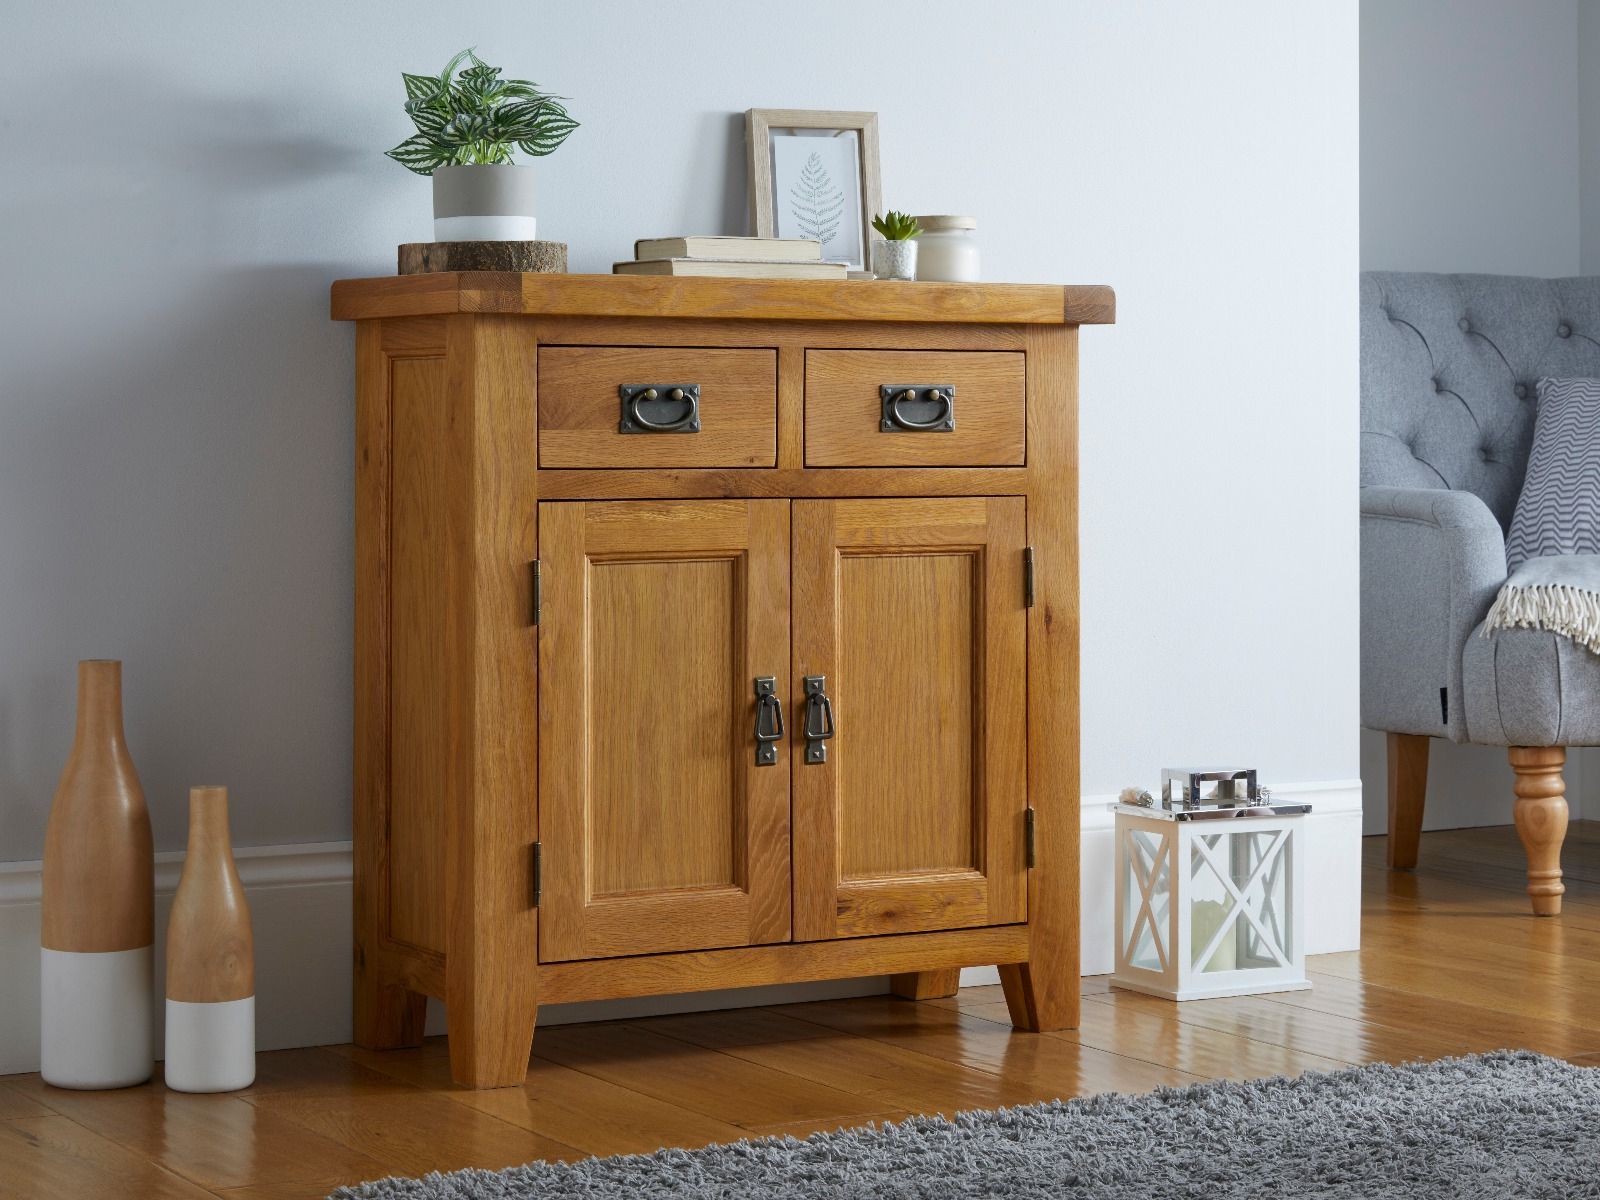 Top Furniture With Well Liked Rustic Oak Sideboards (View 15 of 15)